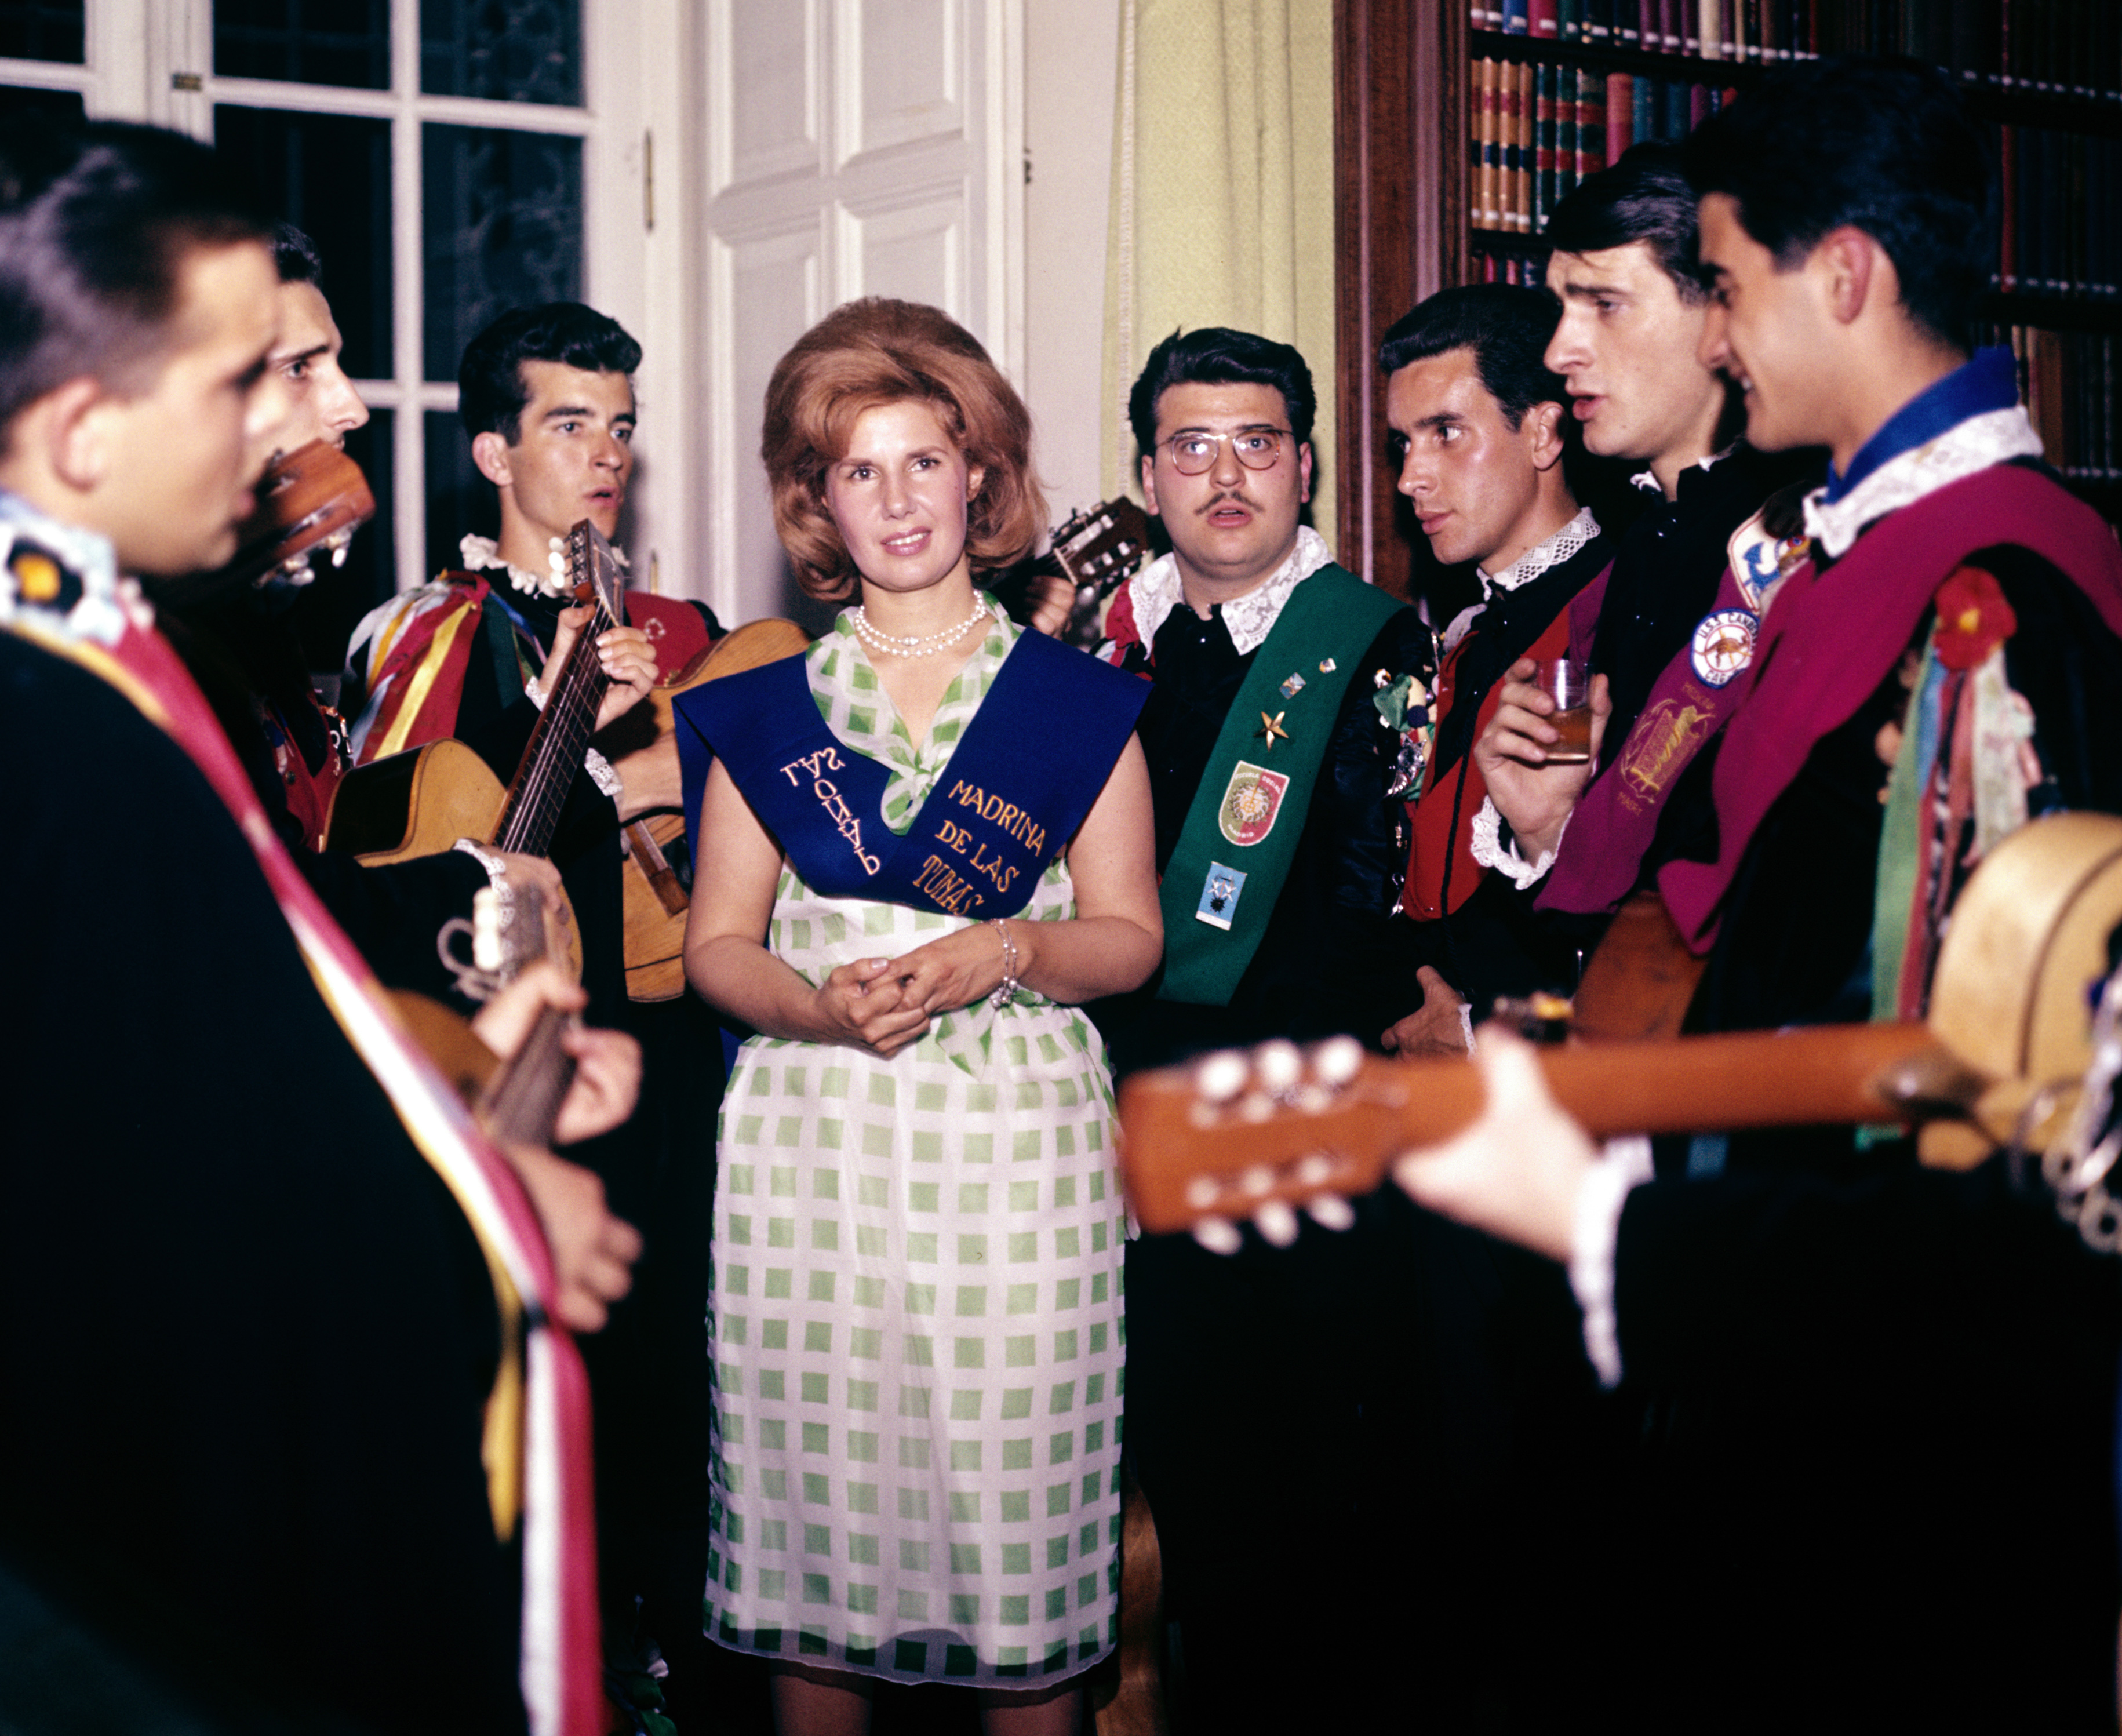 The Duchess of Alba, Maria del Rosario Cayetana Fitz-James Stuart with a group of student musicians in Madrid, Spain in 1962. | Source: Getty Images